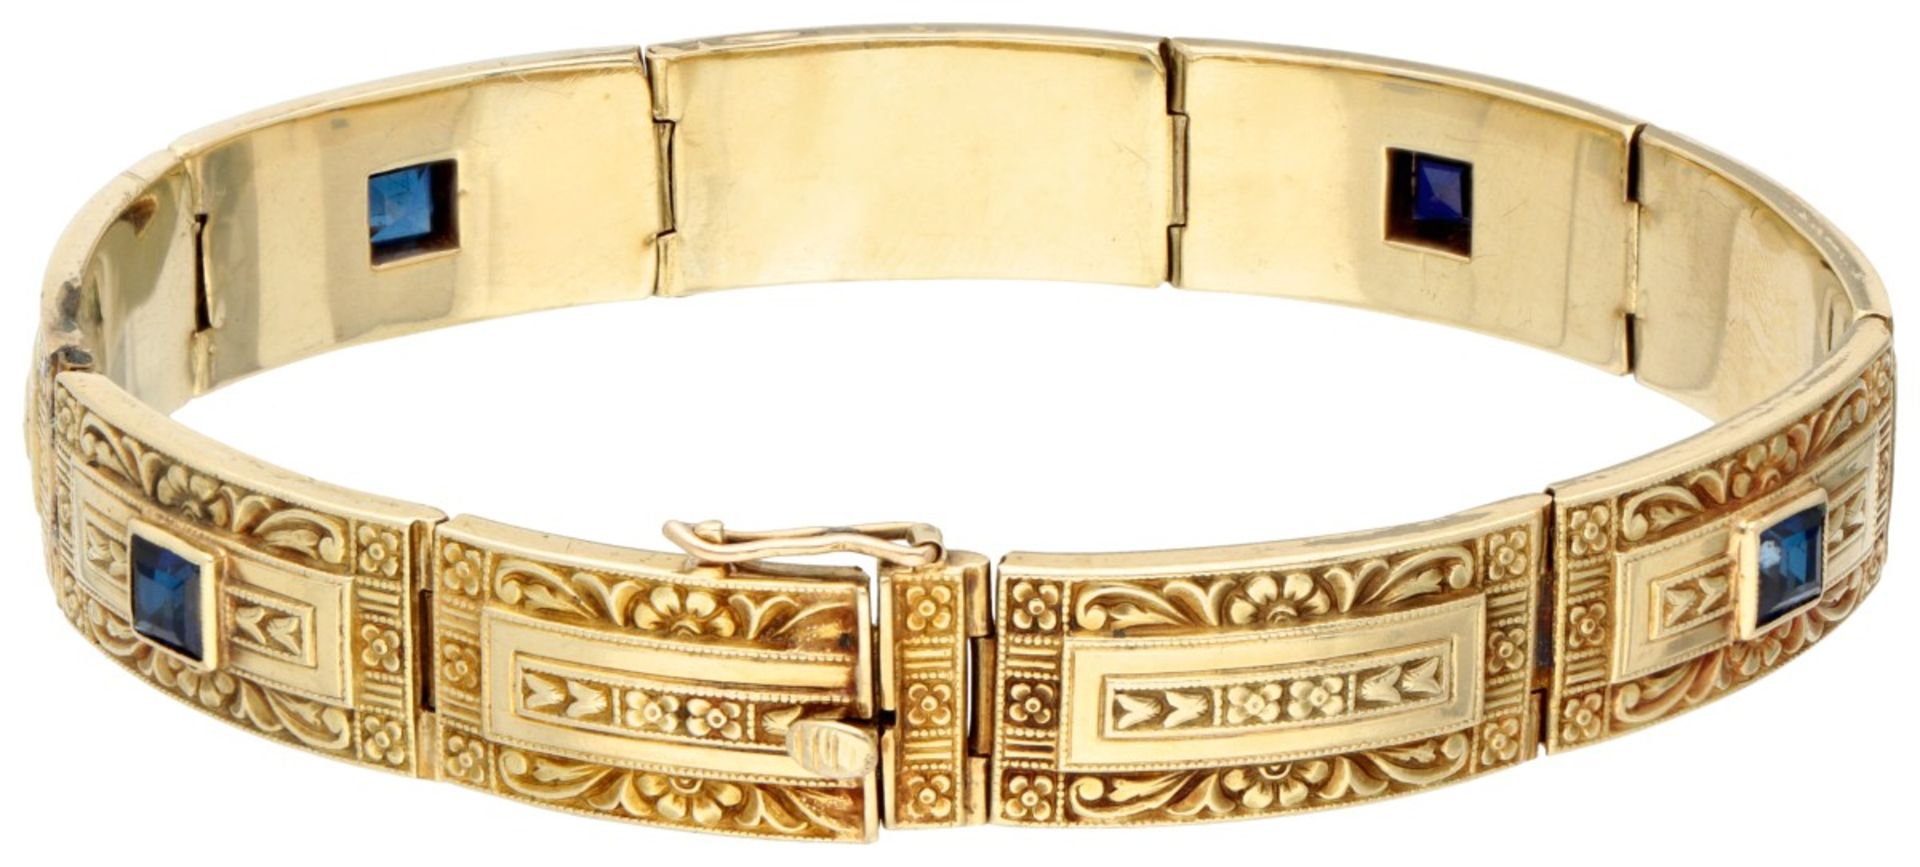 Vintage 14K. yellow gold bracelet set with approx. 1.52 ct. synthetic sapphire. - Image 2 of 4